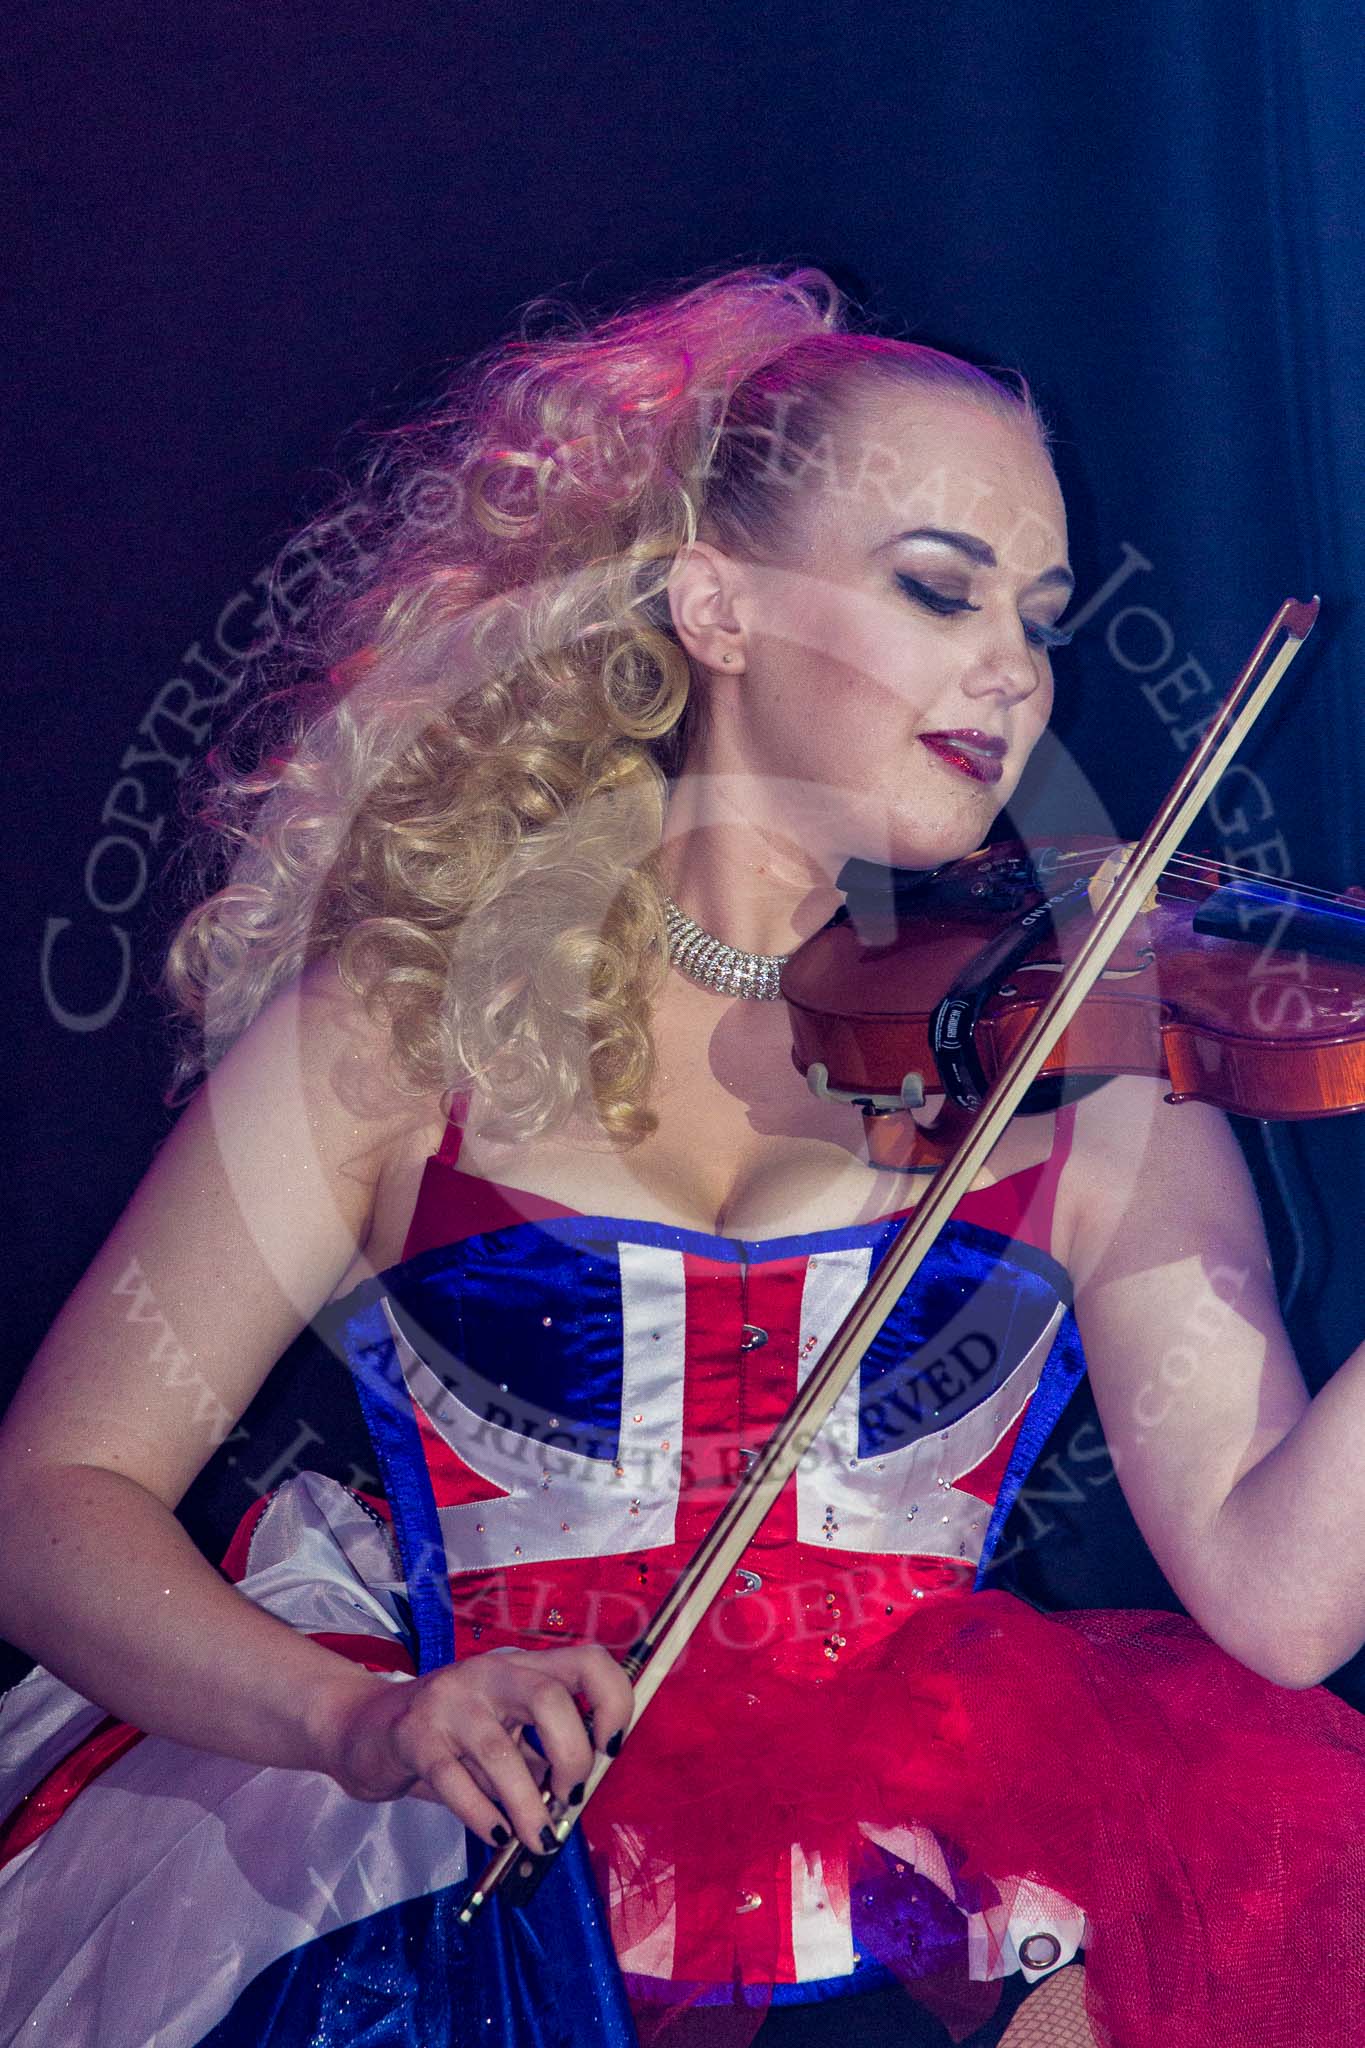 Grand Opening of the DBPC IXL Event Centre: JParmoire's Folies - violin player Rosalie Butcher..
Dallas Burston Polo Club, Stoneythorpe Estate,
Southam,
Warwickshire,
United Kingdom,
on 05 December 2013 at 20:16, image #133